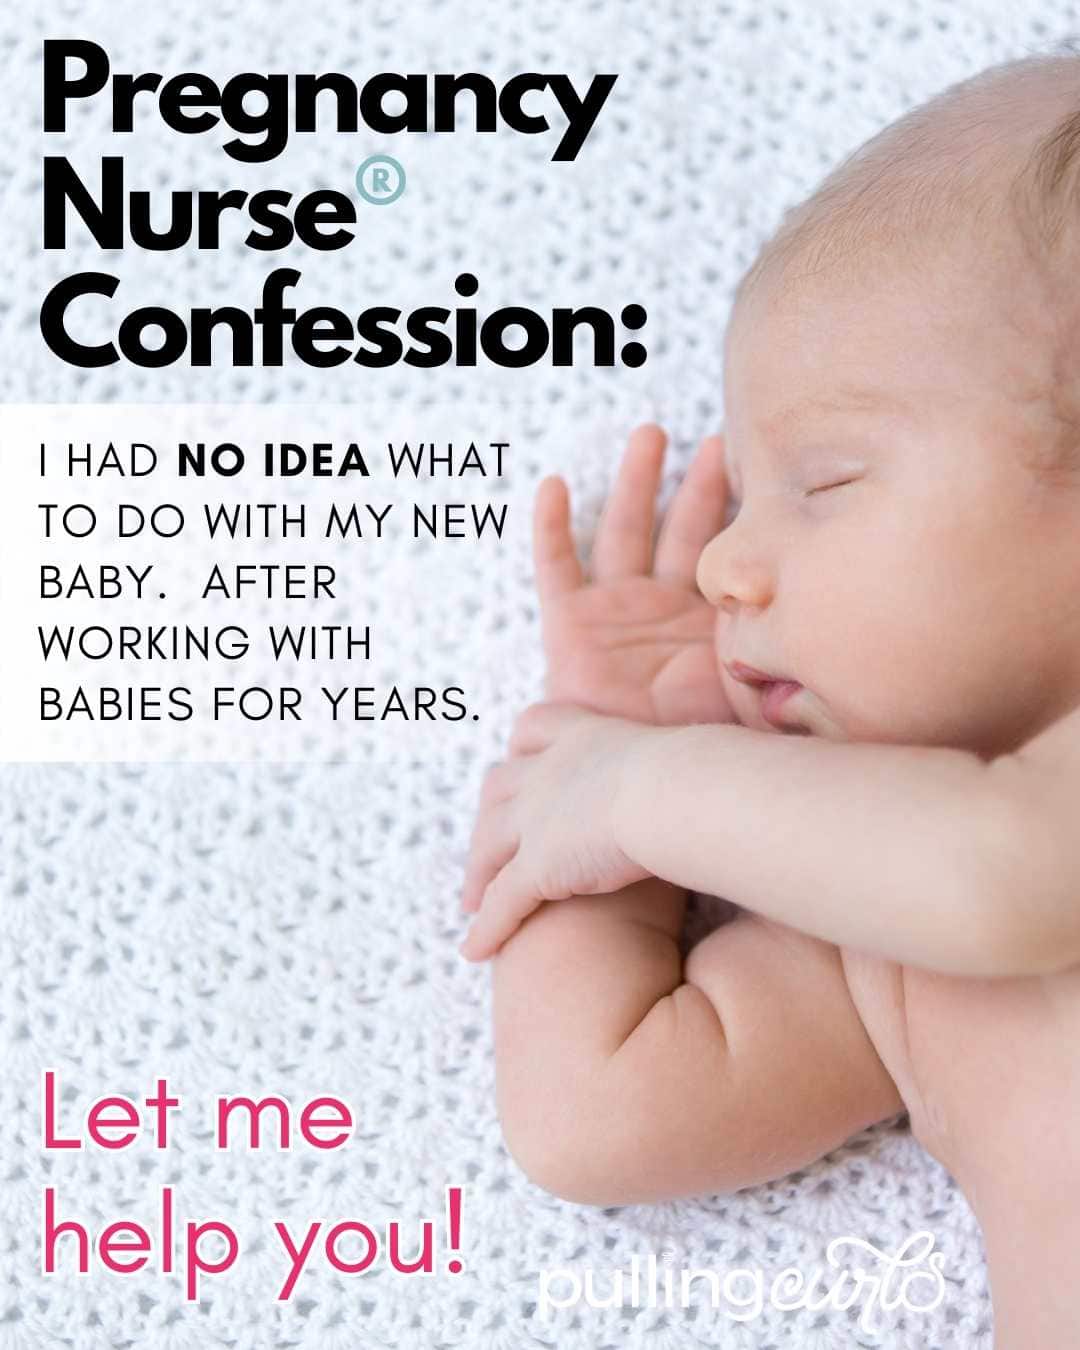 newborn / pregnancy nurse confessions - I had NO IDEA what to do with my new baby, after working wiht babies for years -- let me help you! via @pullingcurls